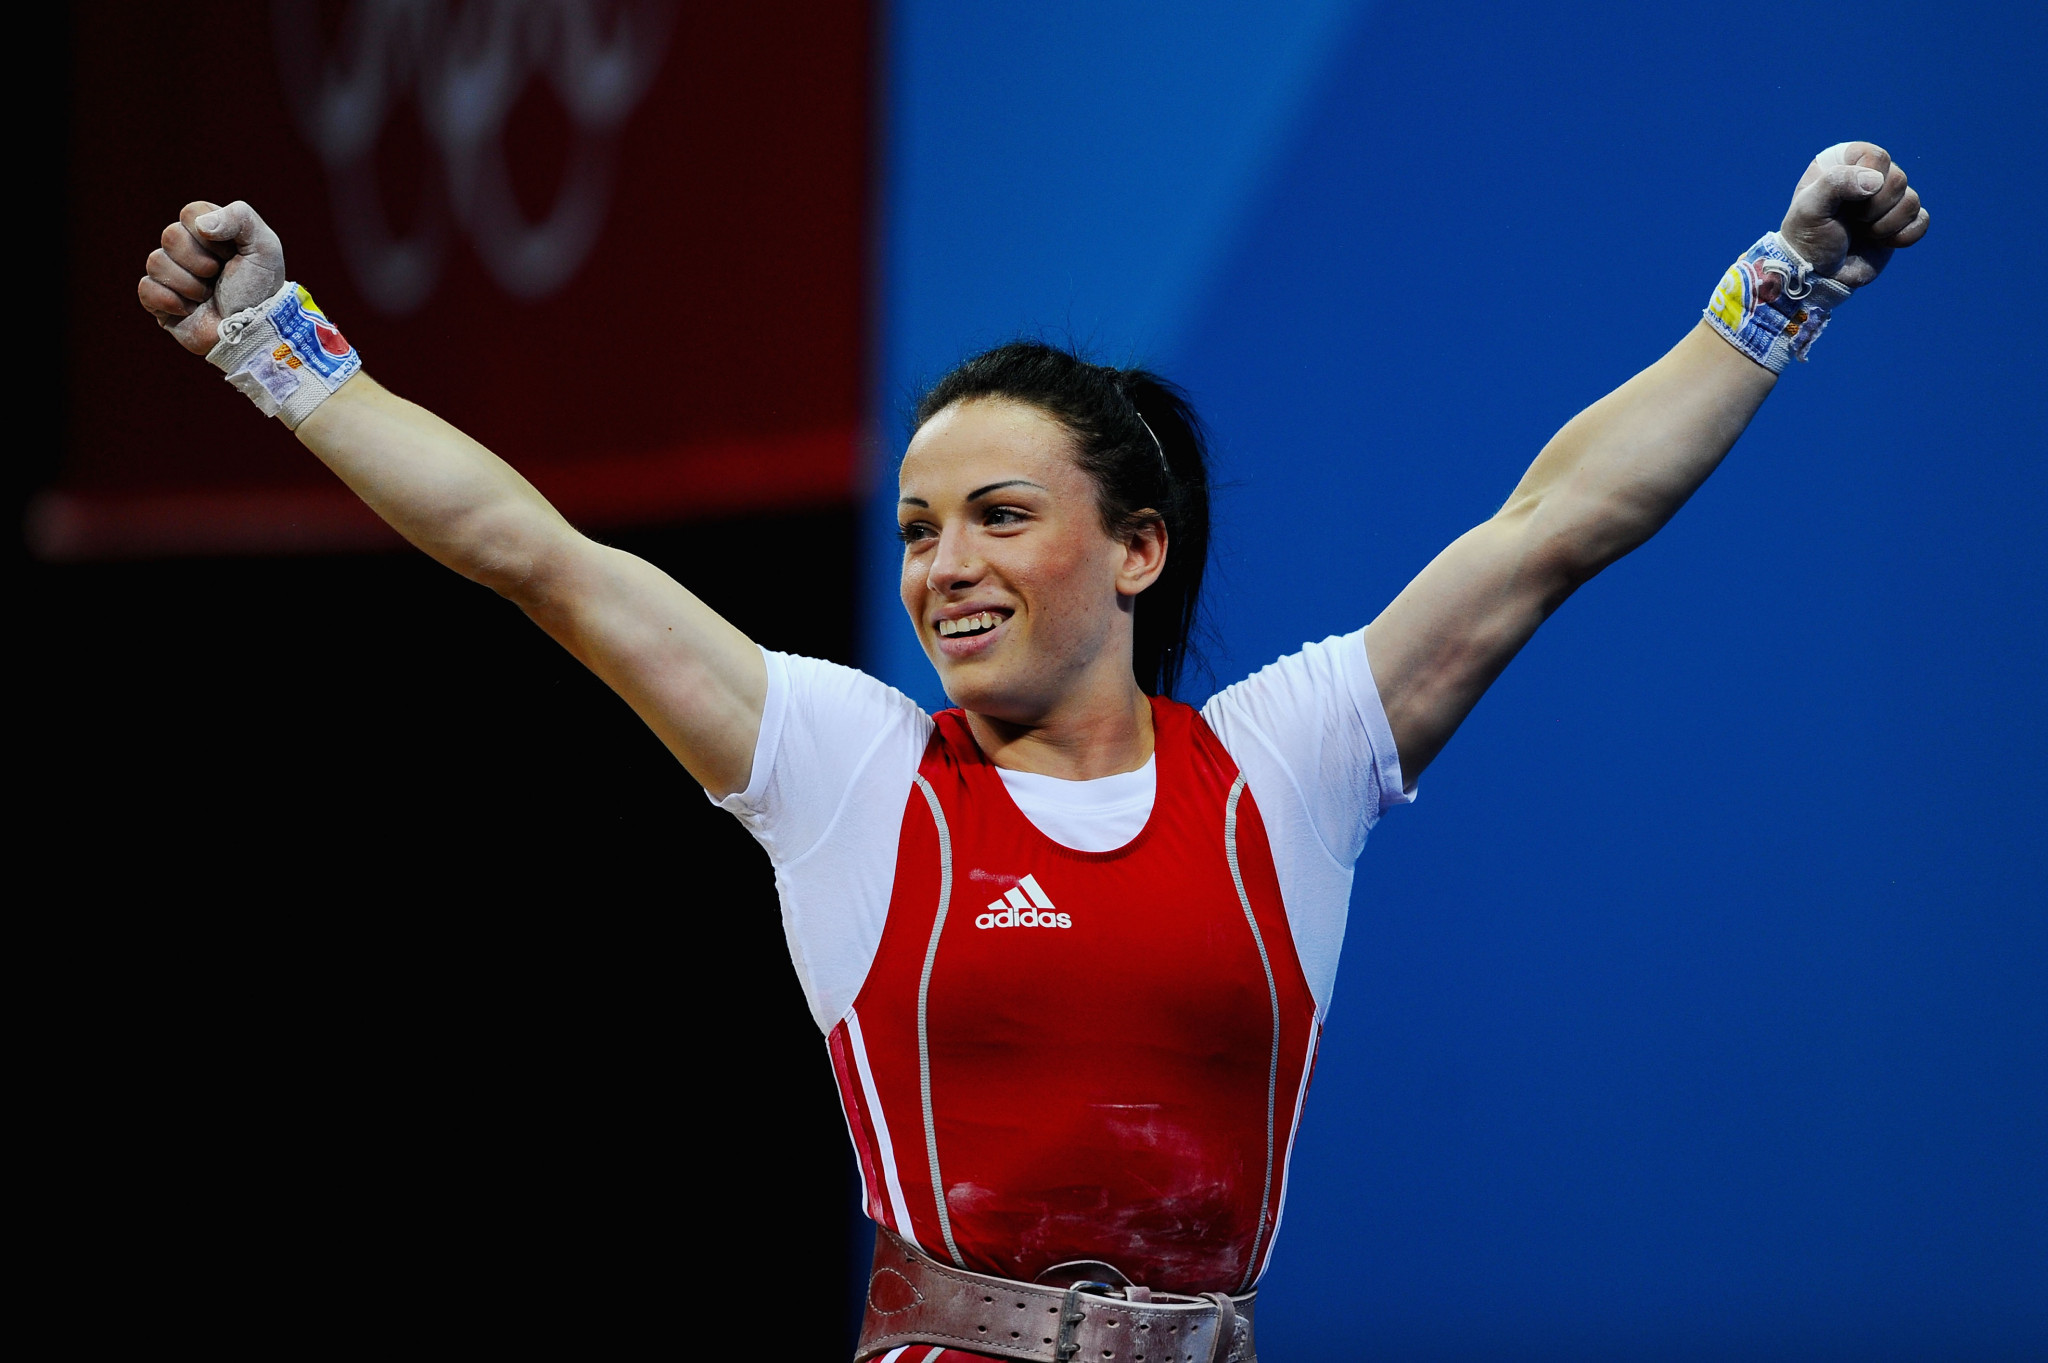 Moldovan weightlifter Cristina Iovu was stripped of her London 2012 Olympic medal when the IOC retested stored samples  ©Getty Images